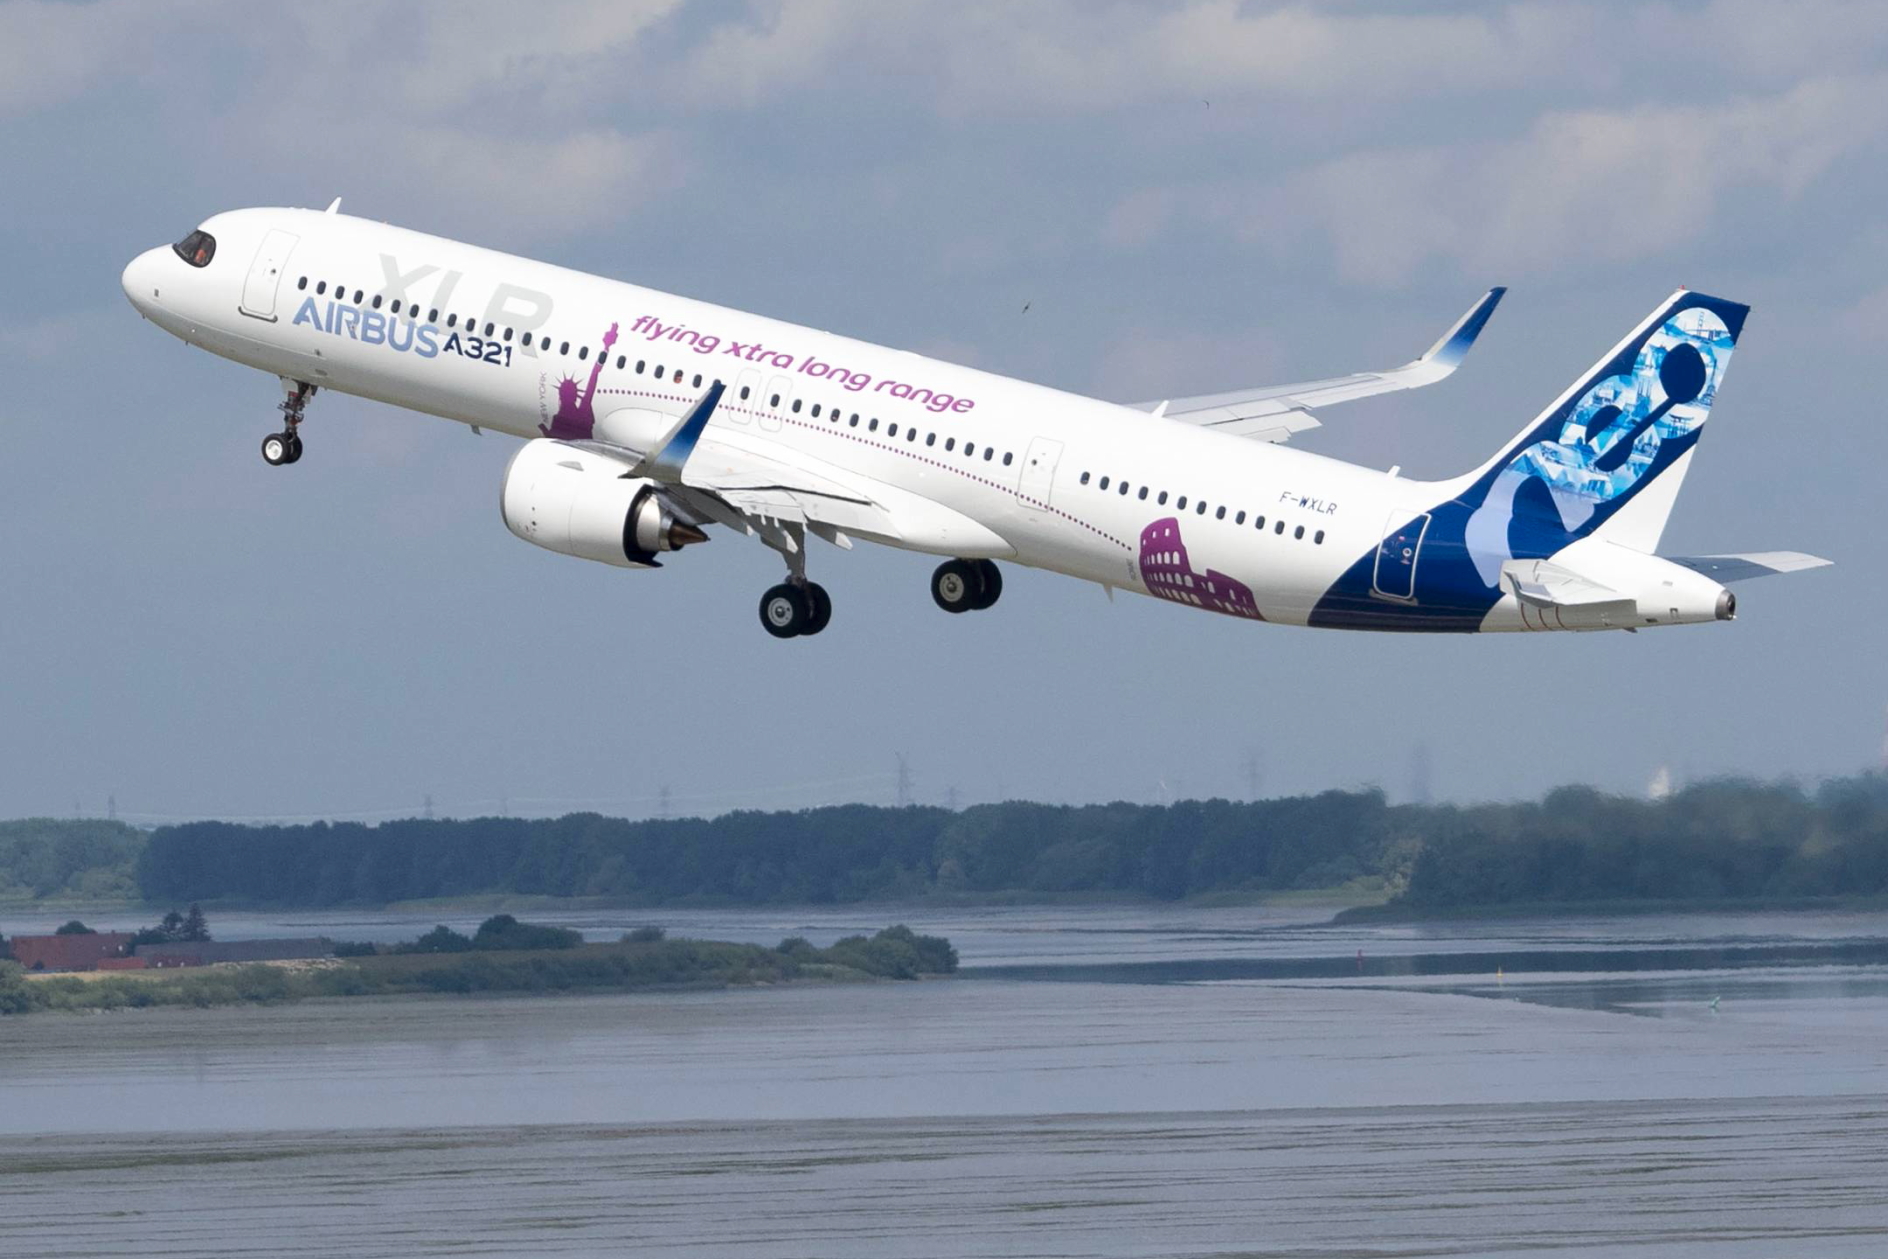 Airbus A321XLR takes off on maiden flight. Click to enlarge.